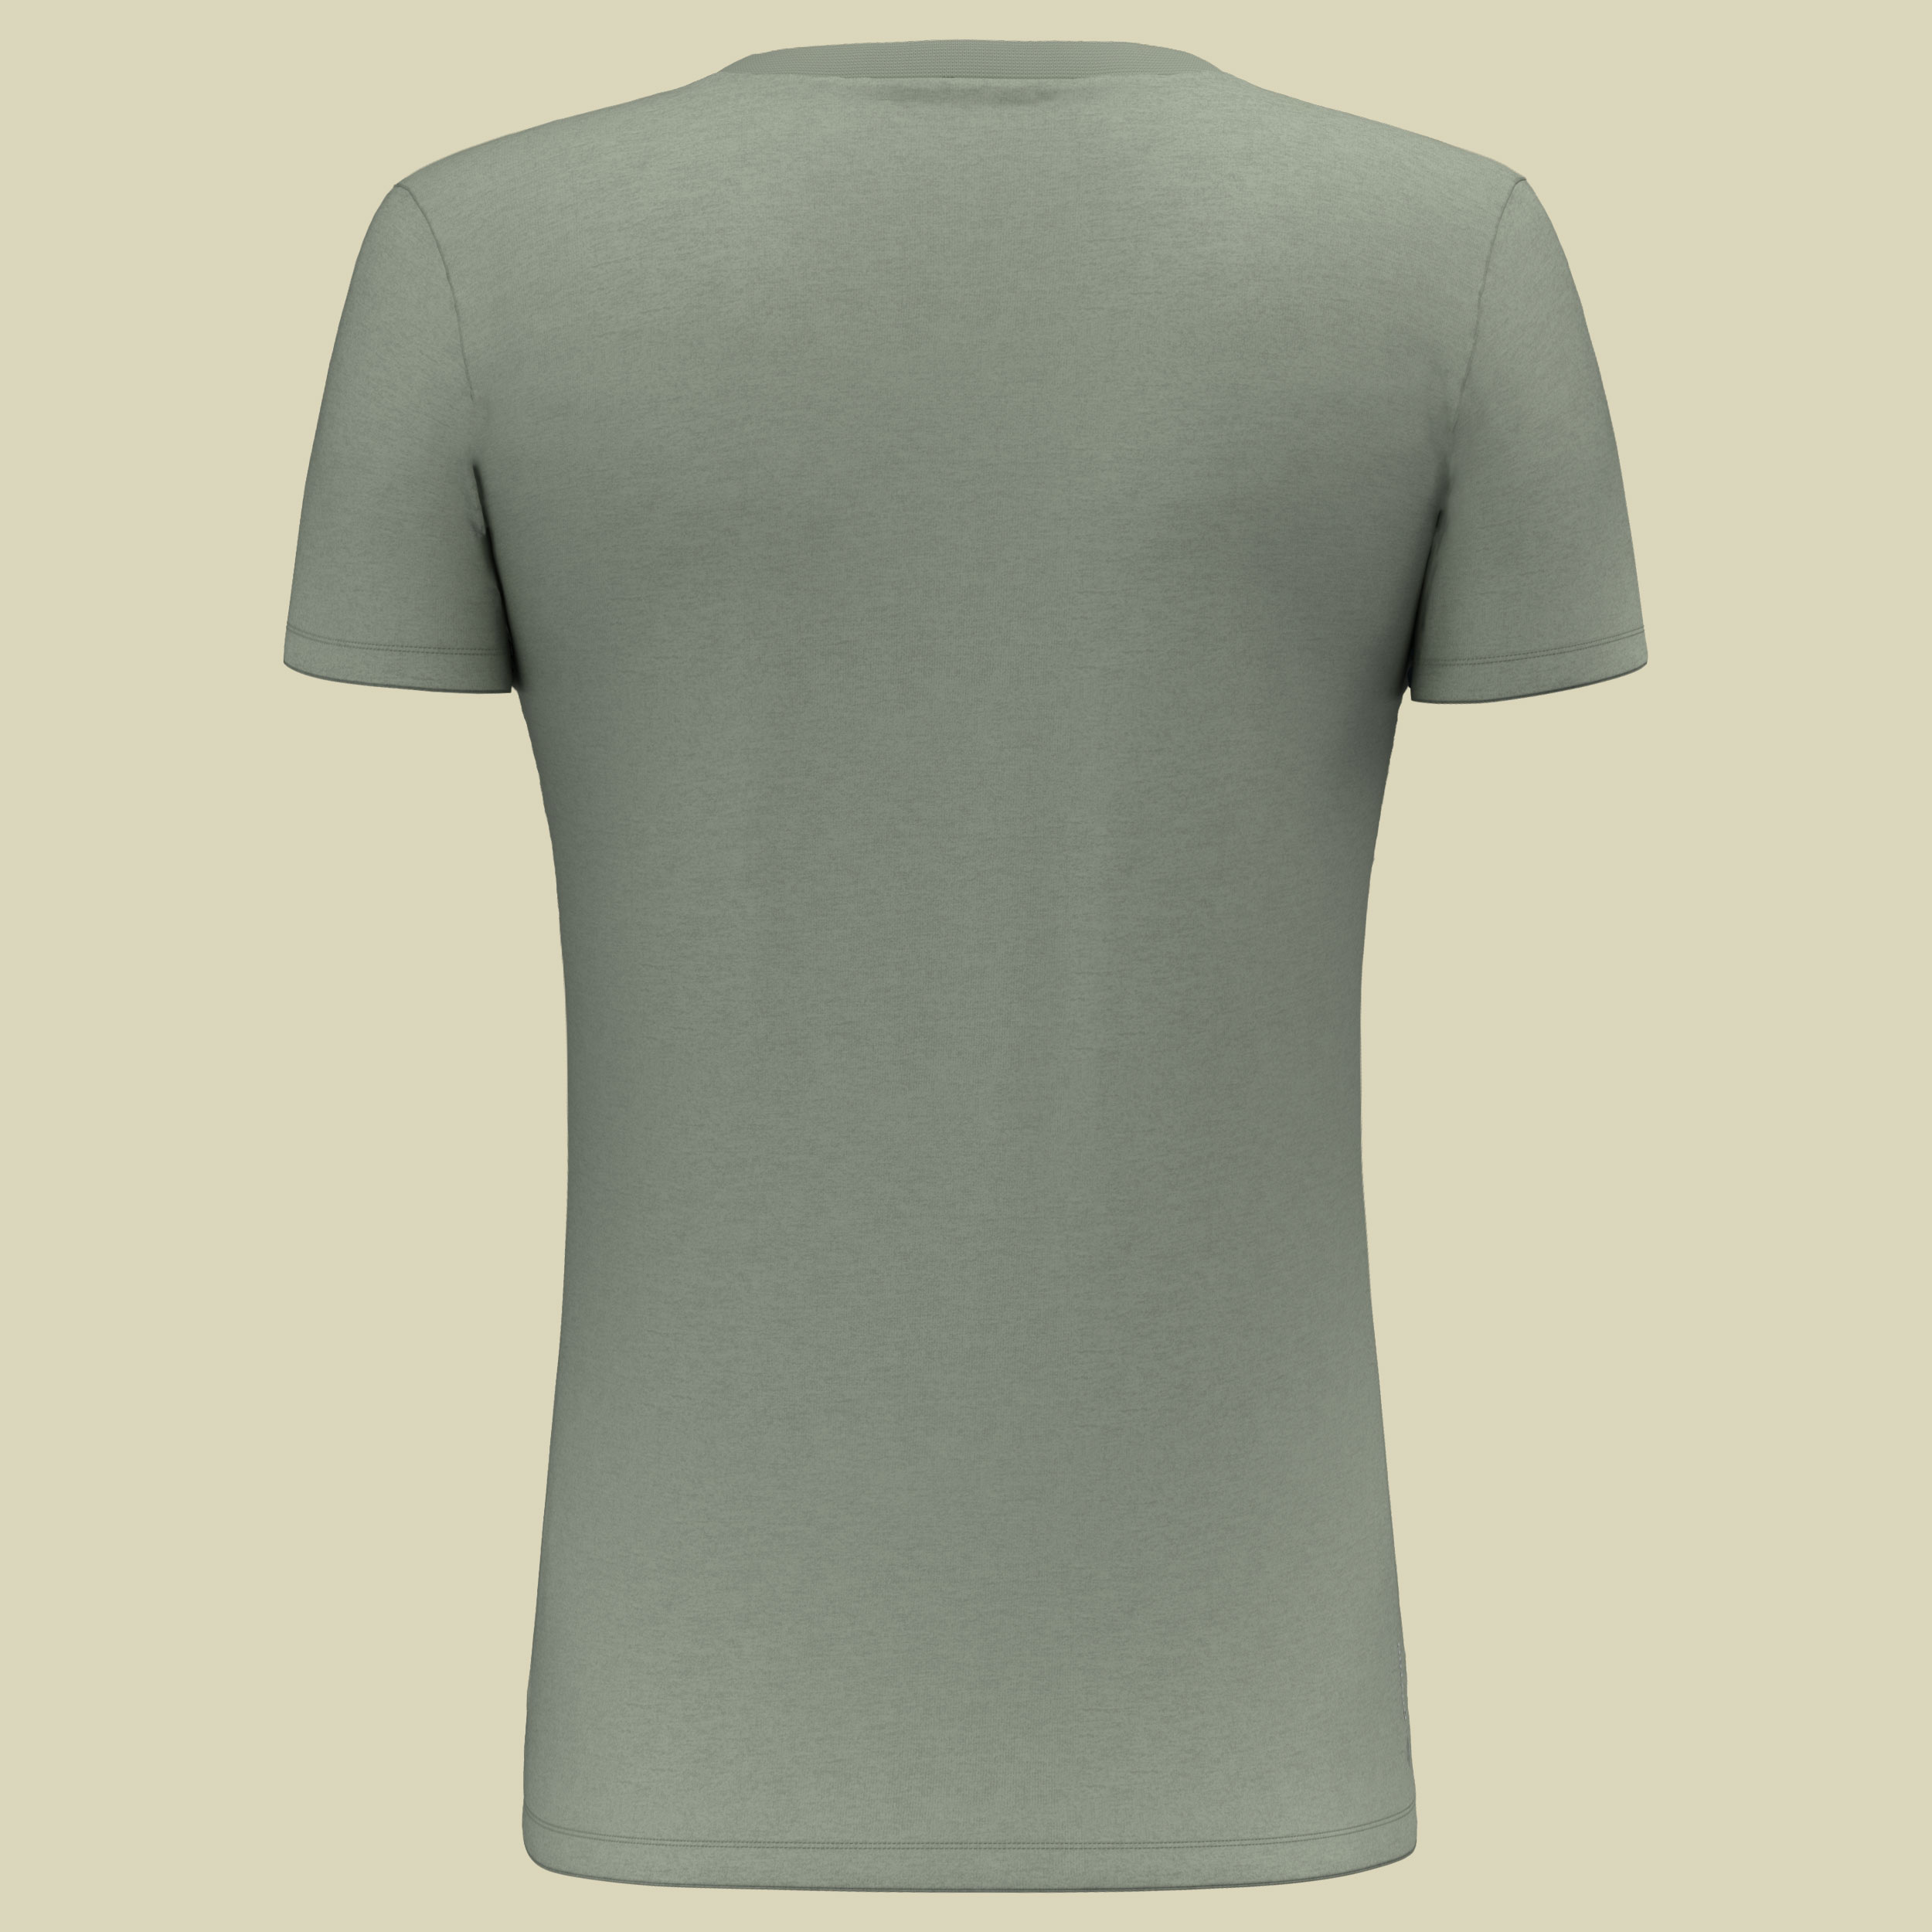 SOLID Dry S/S Tee Women Größe 38 Farbe shadow